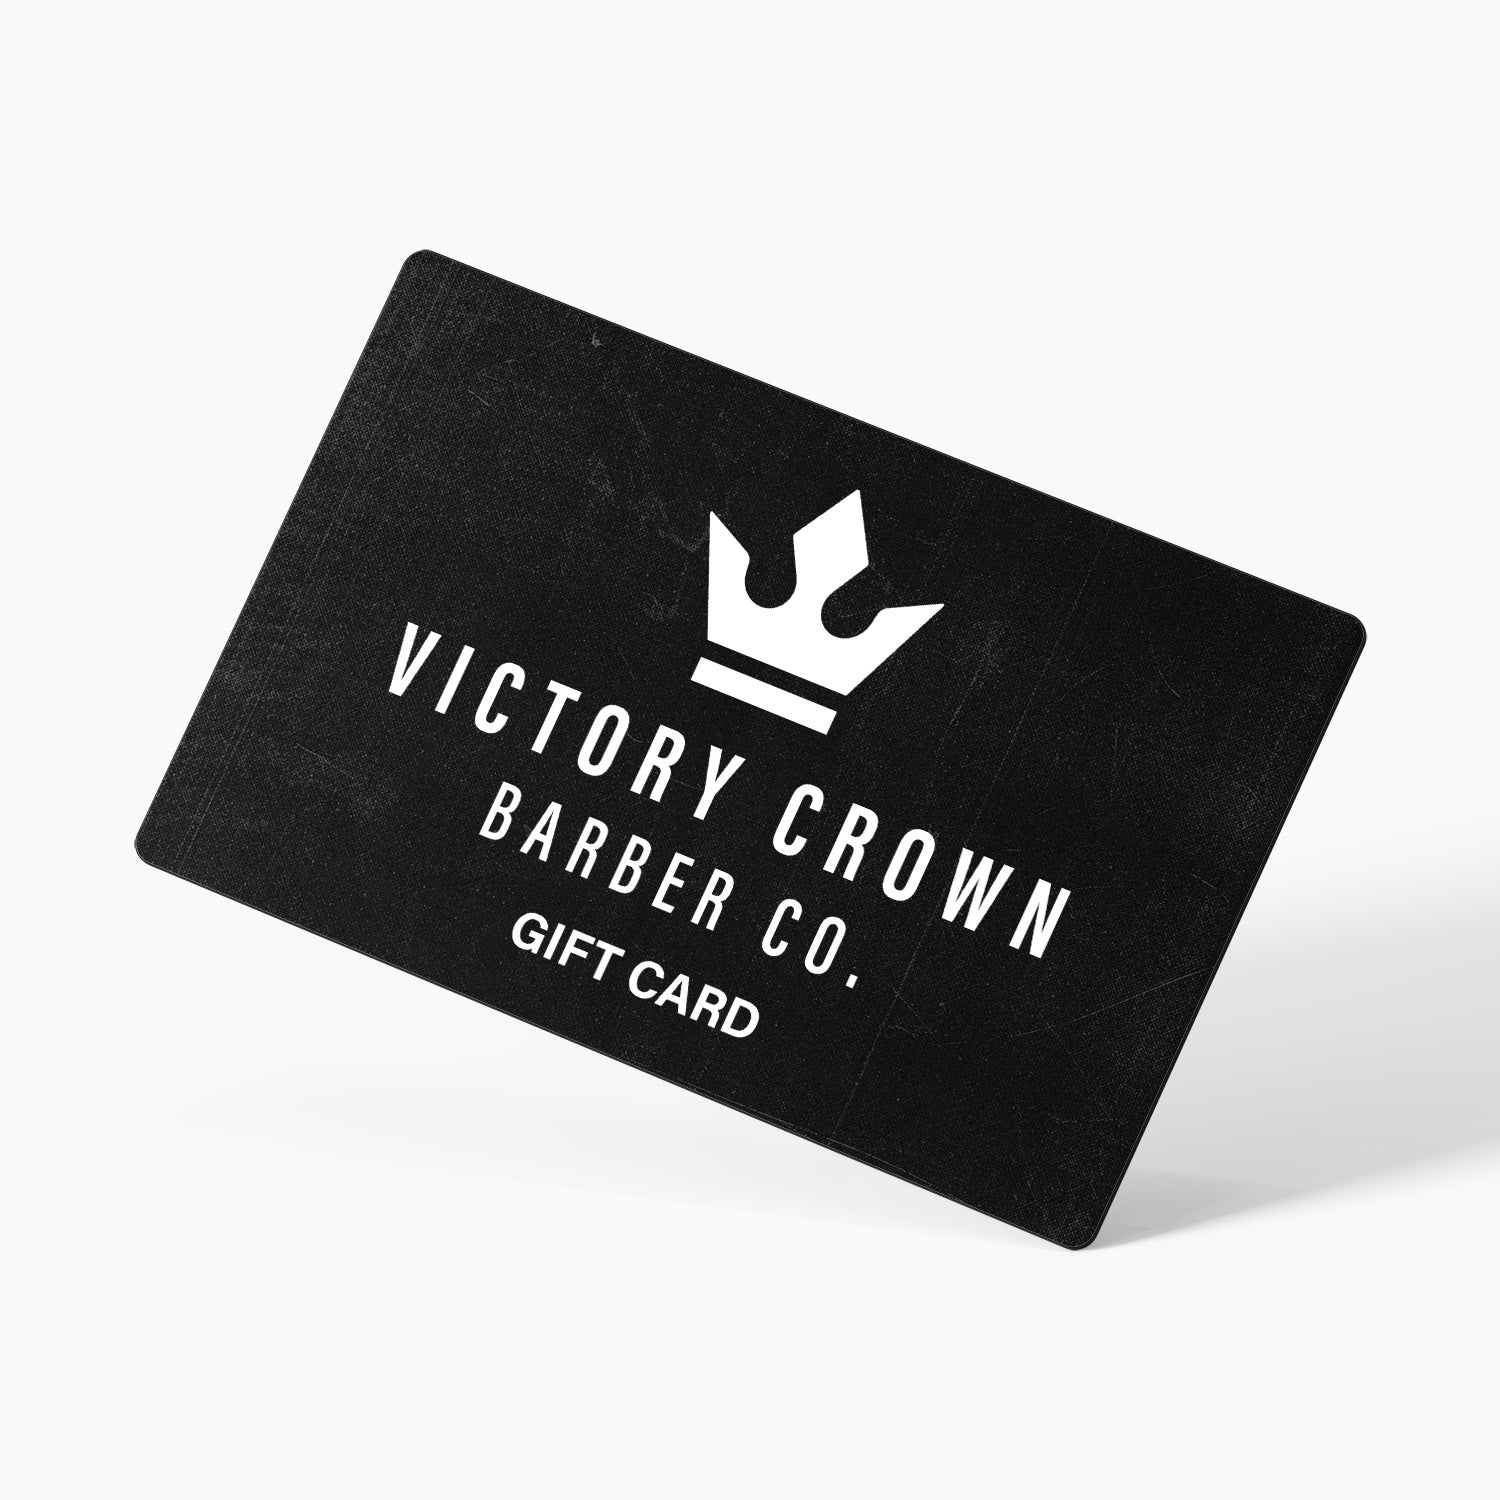 Victory Crown Gift Card